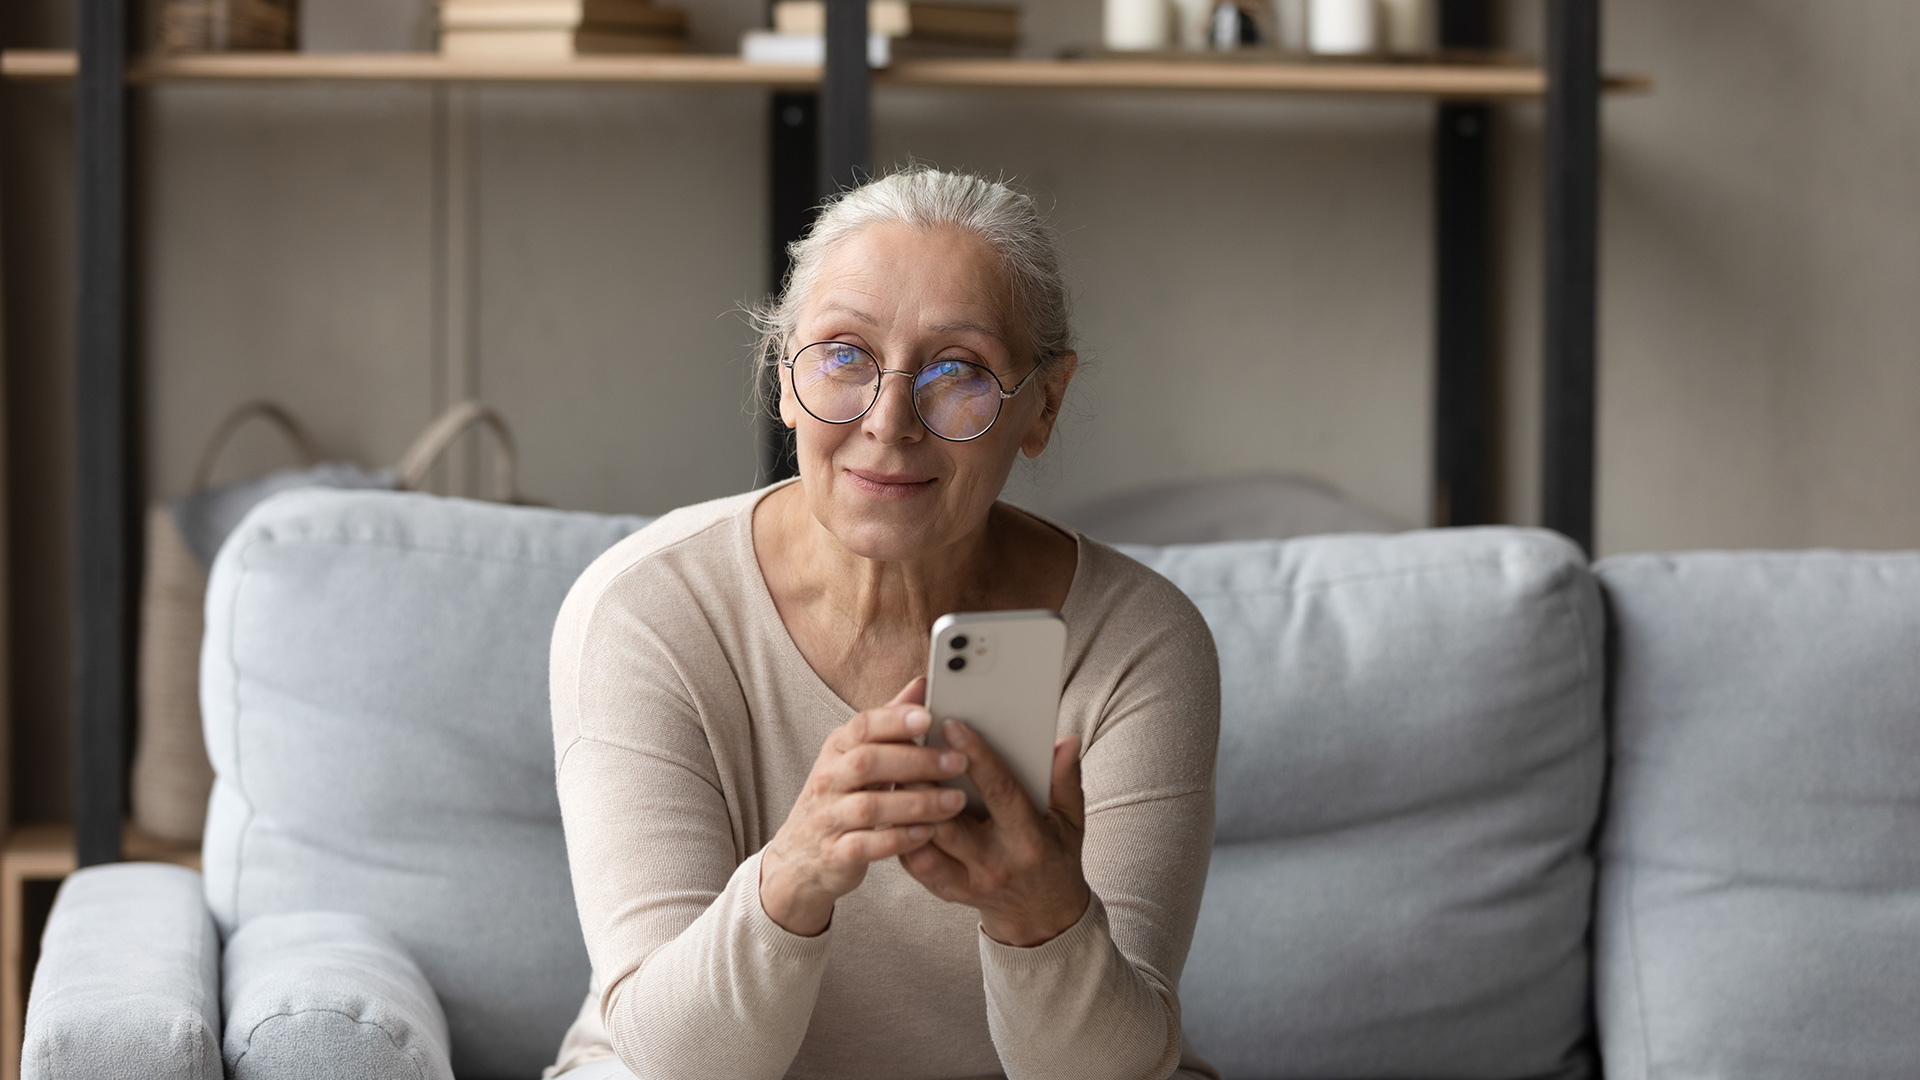 White-haired woman with glasses and beige t-shirt, holding her phone while sitting down on a couch. She is half-smiling.